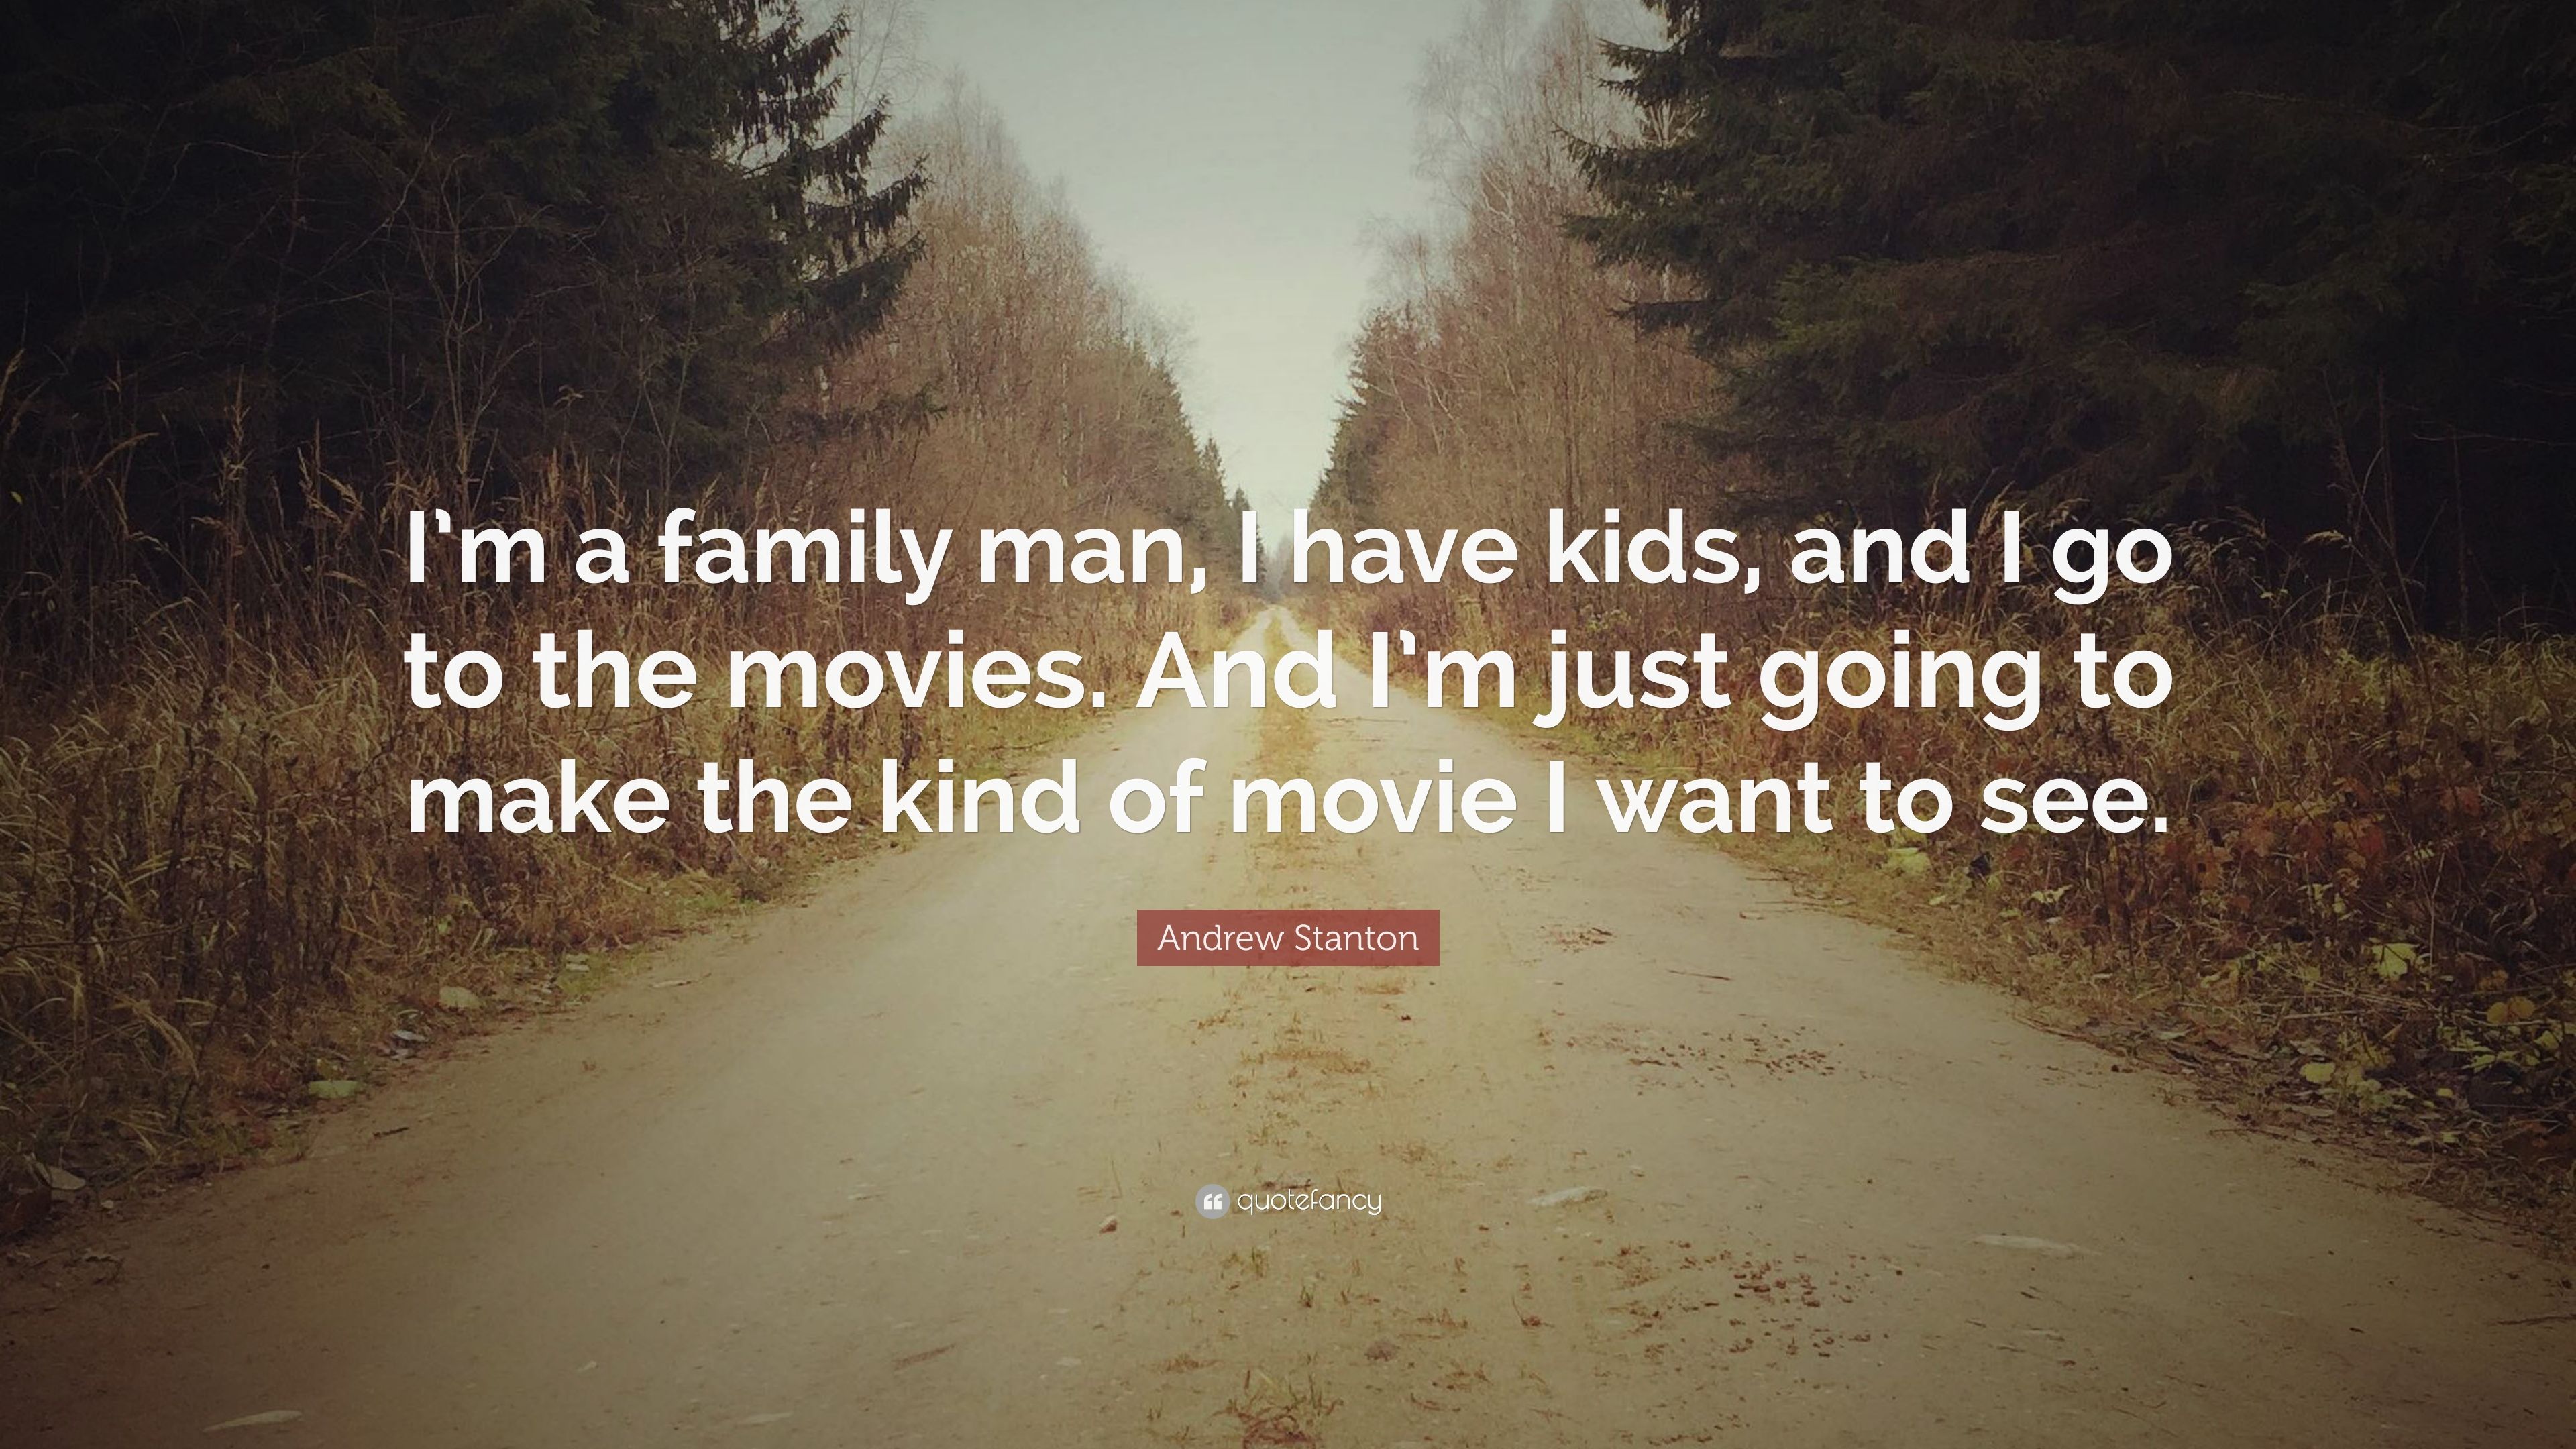 Andrew Stanton Quote: “I'm a family man, I have kids, and I go to